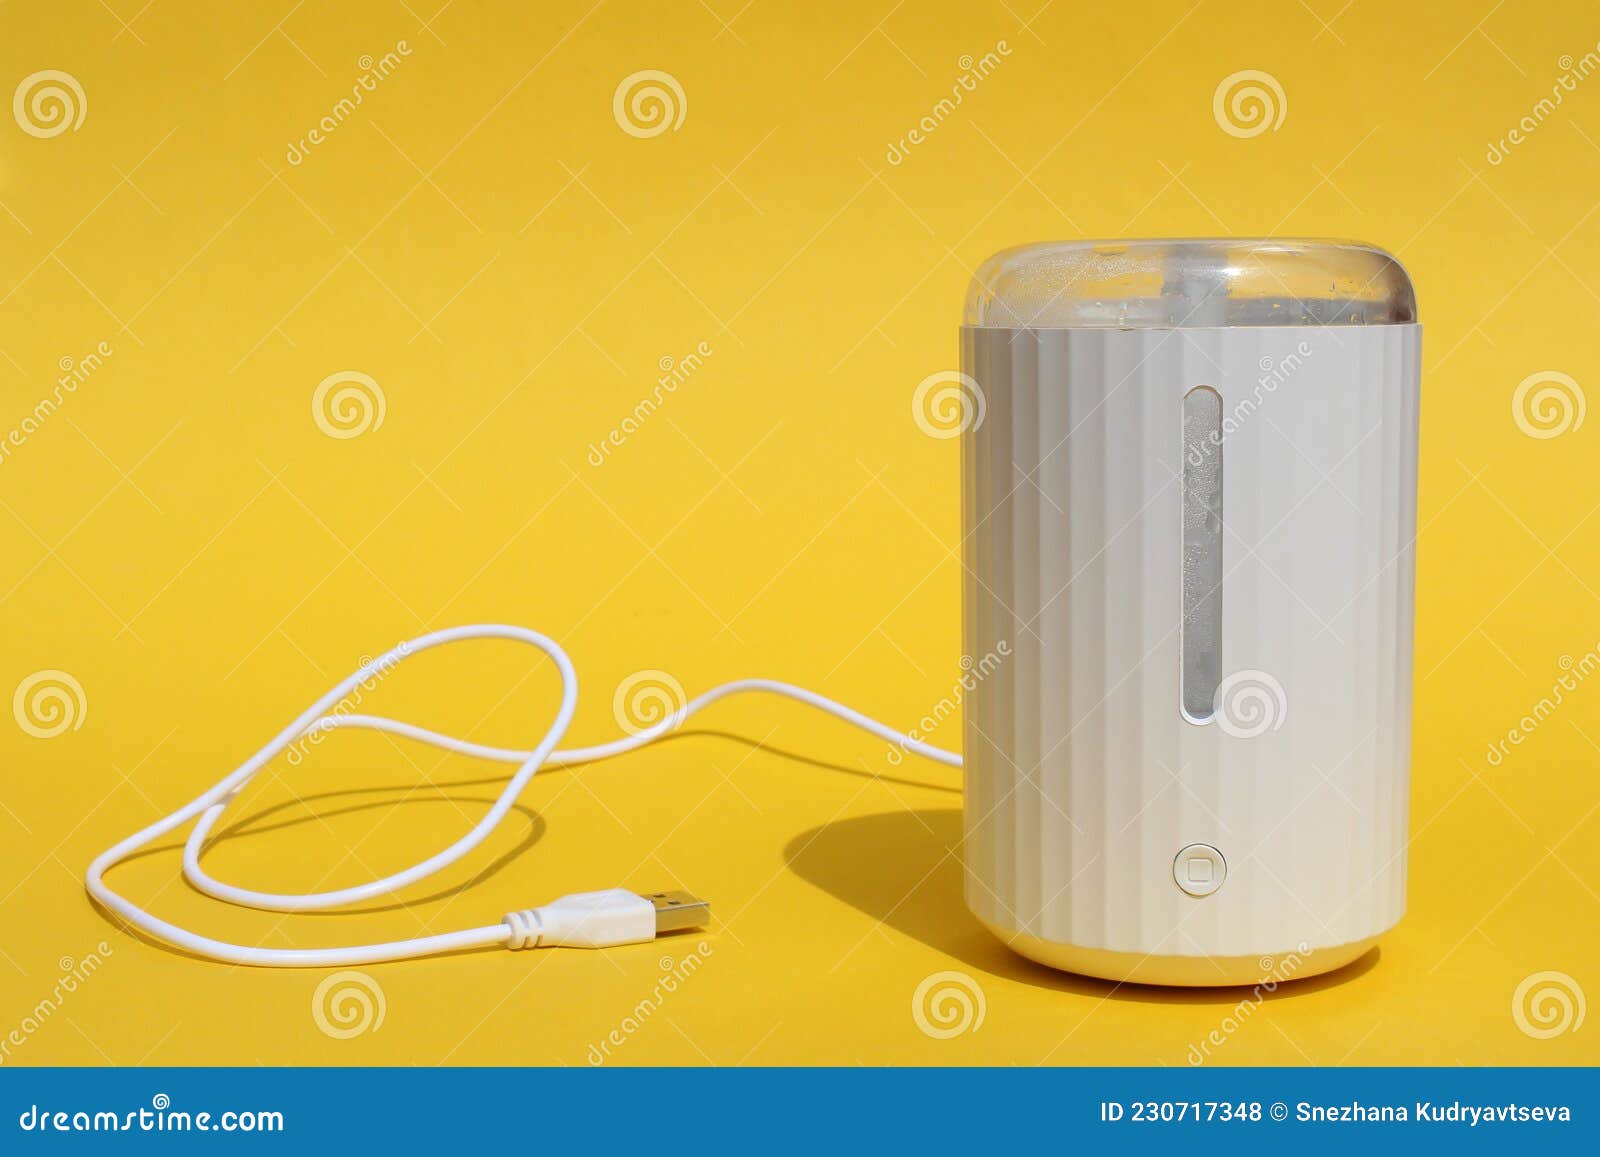 a white humidifier stands on a yellow background.